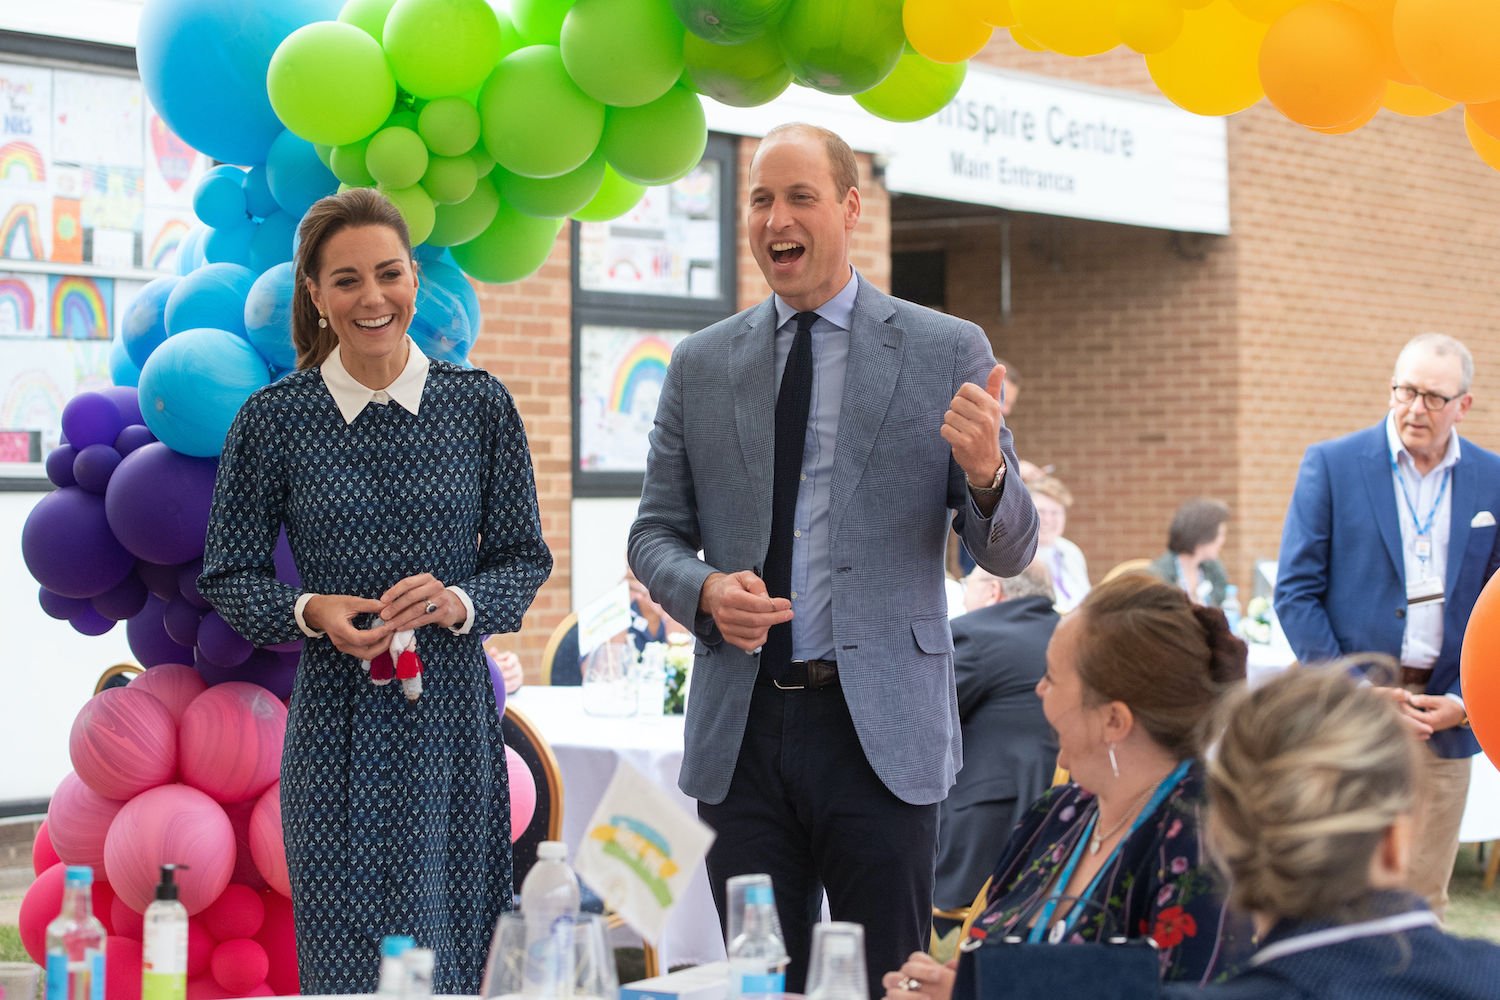 Kate Middleton and Prince William visit to Queen Elizabeth Hospital in King's Lynn as part of the NHS birthday celebrations on July 5, 2020